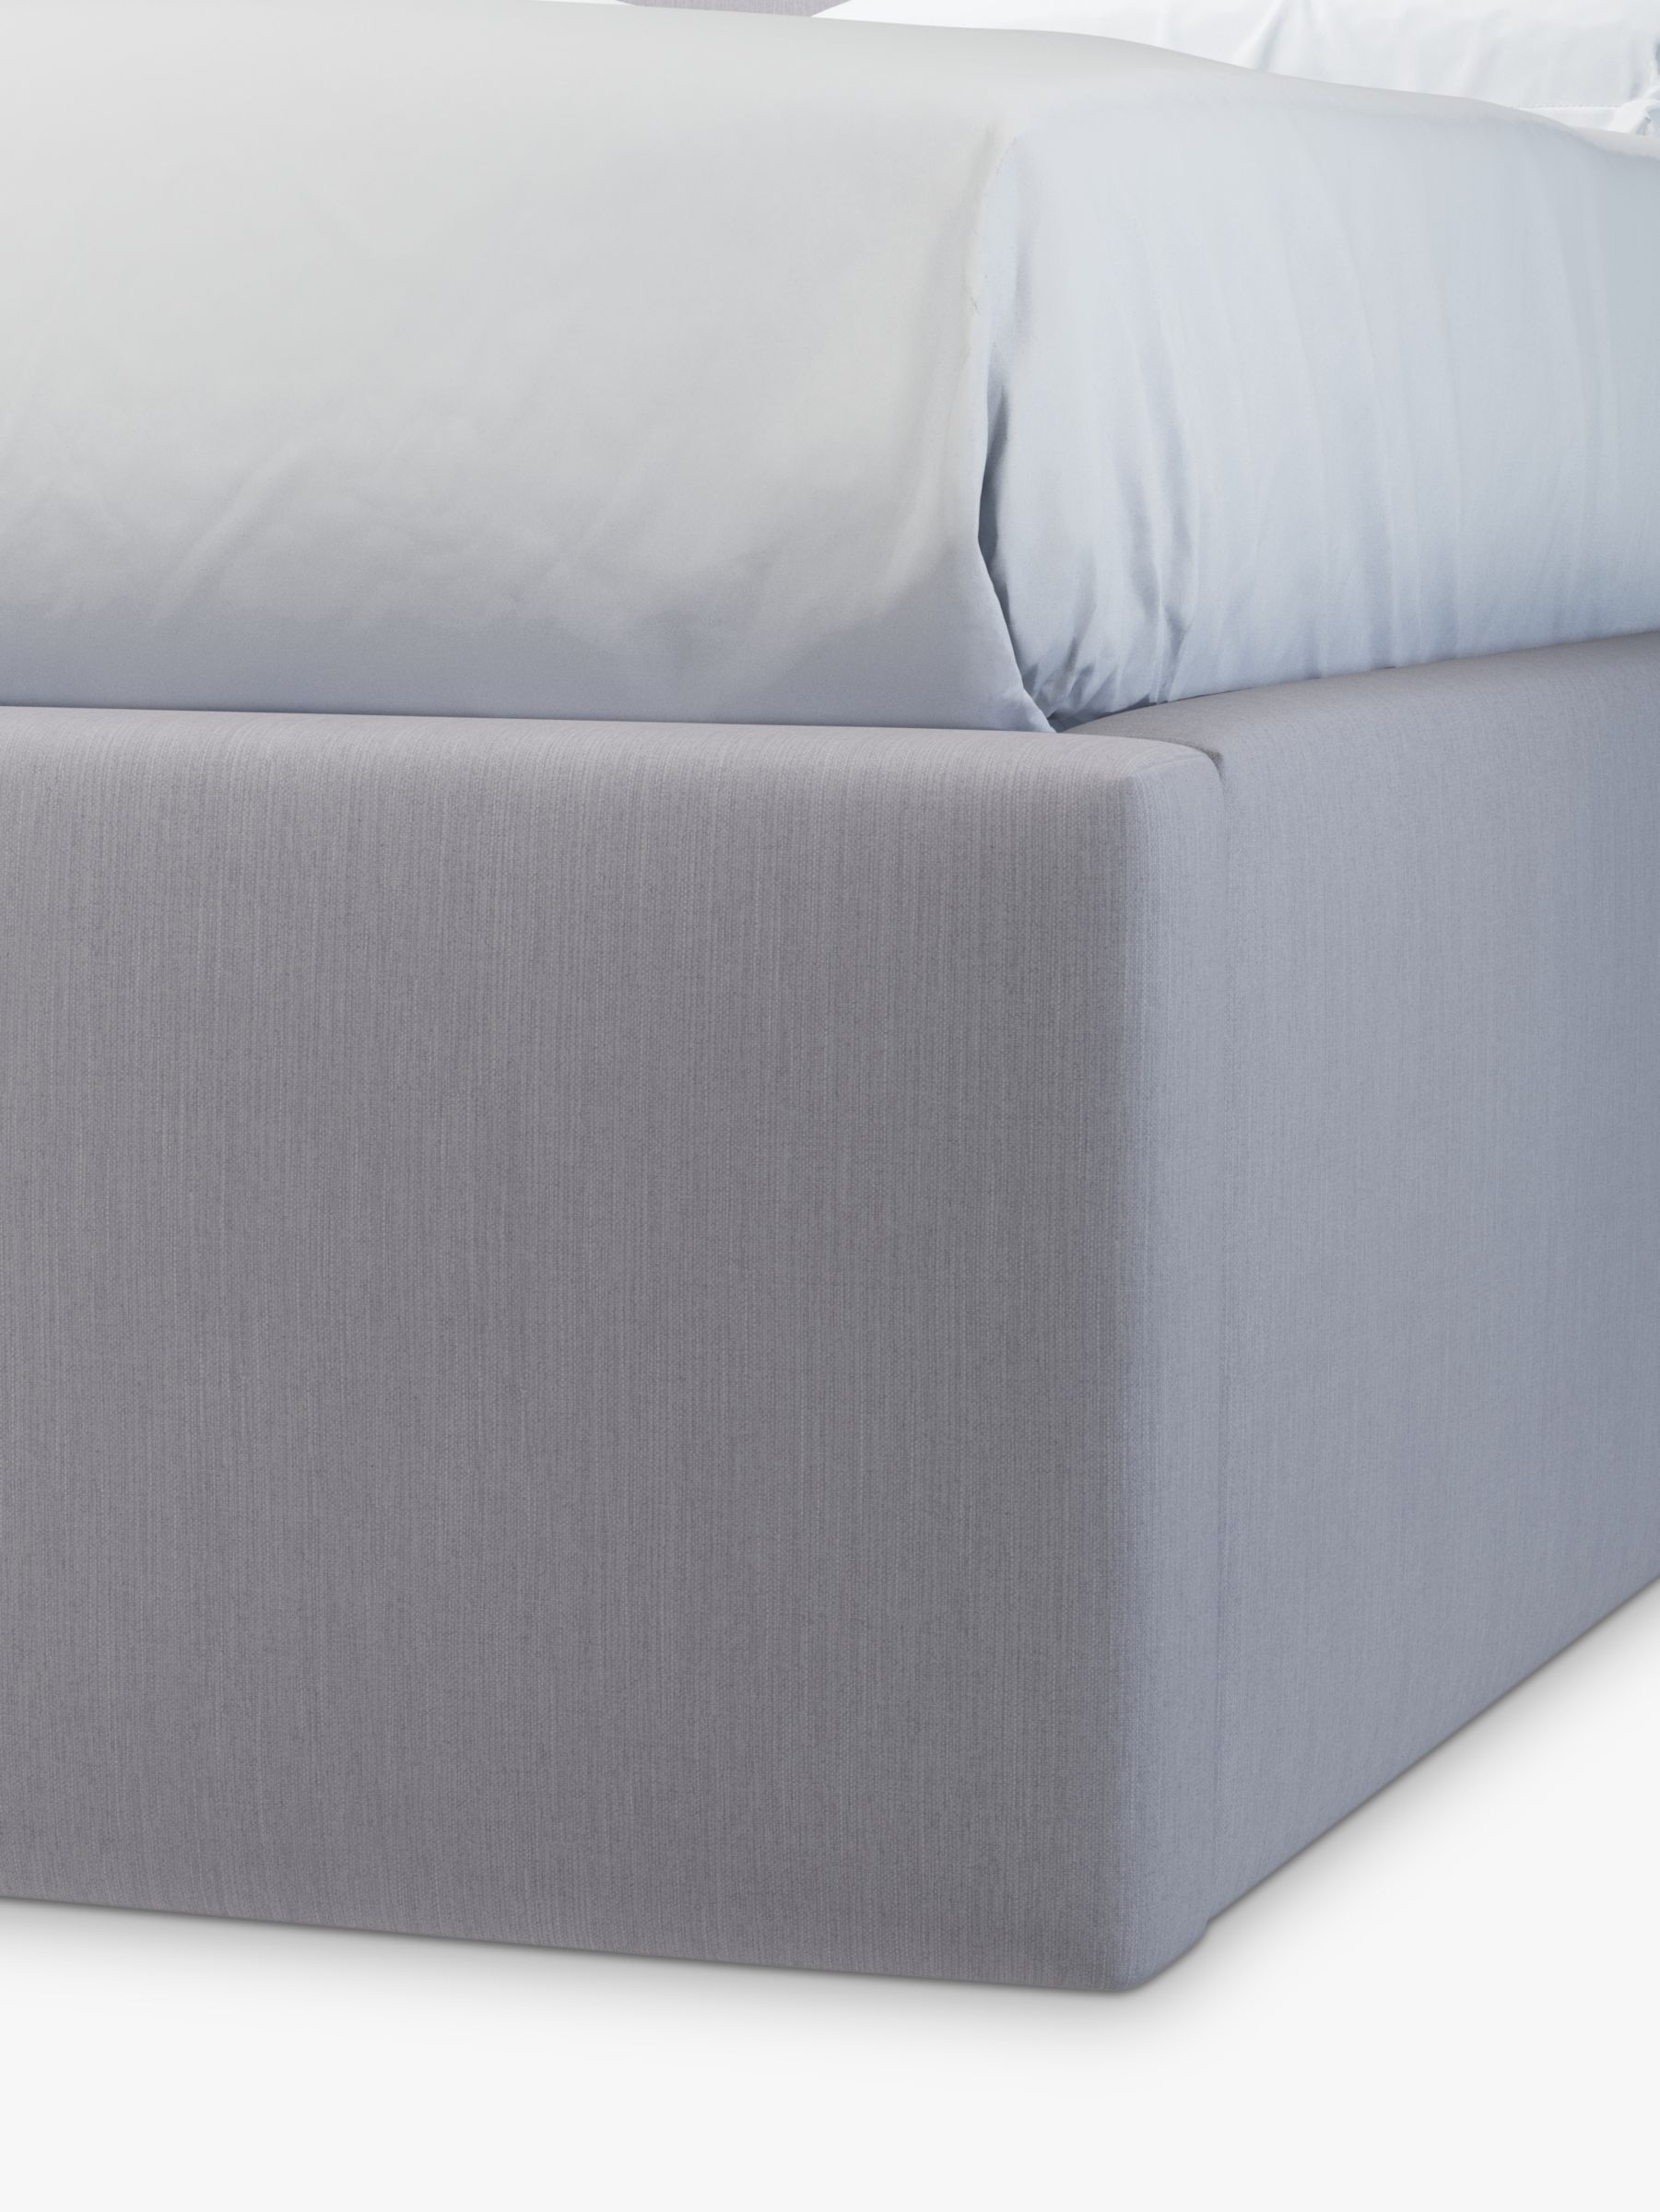 John Lewis Emily Ottoman Storage Upholstered Bed Frame, Double, Cotton ...